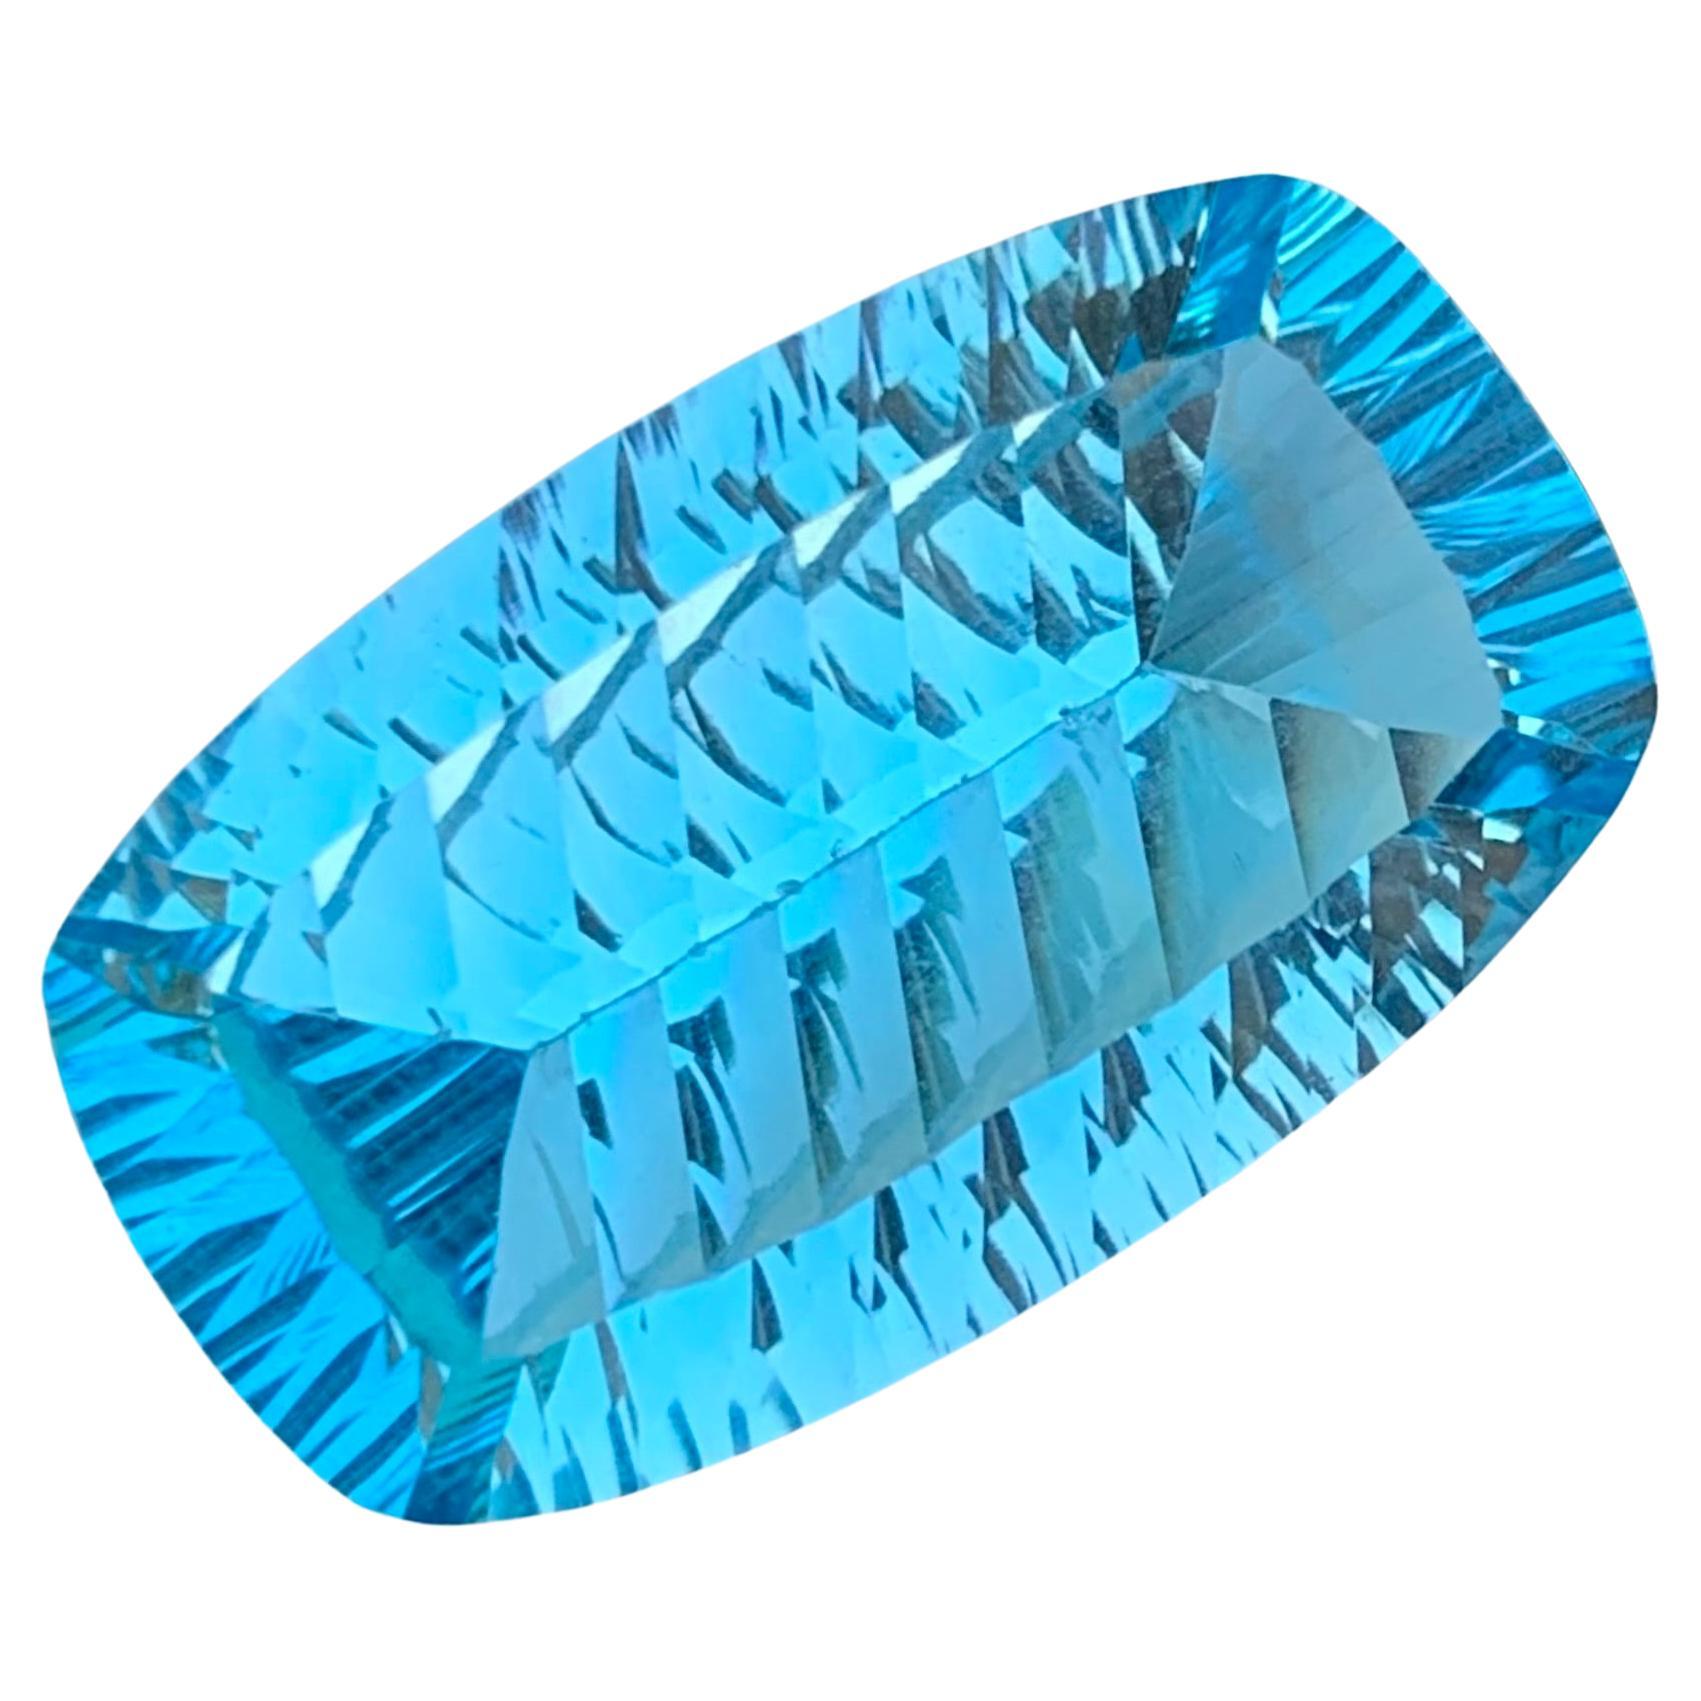 Huge 28.25 Carats Stunning Loose Sky Blue Topaz Laser Cut For Necklace Jewelry For Sale